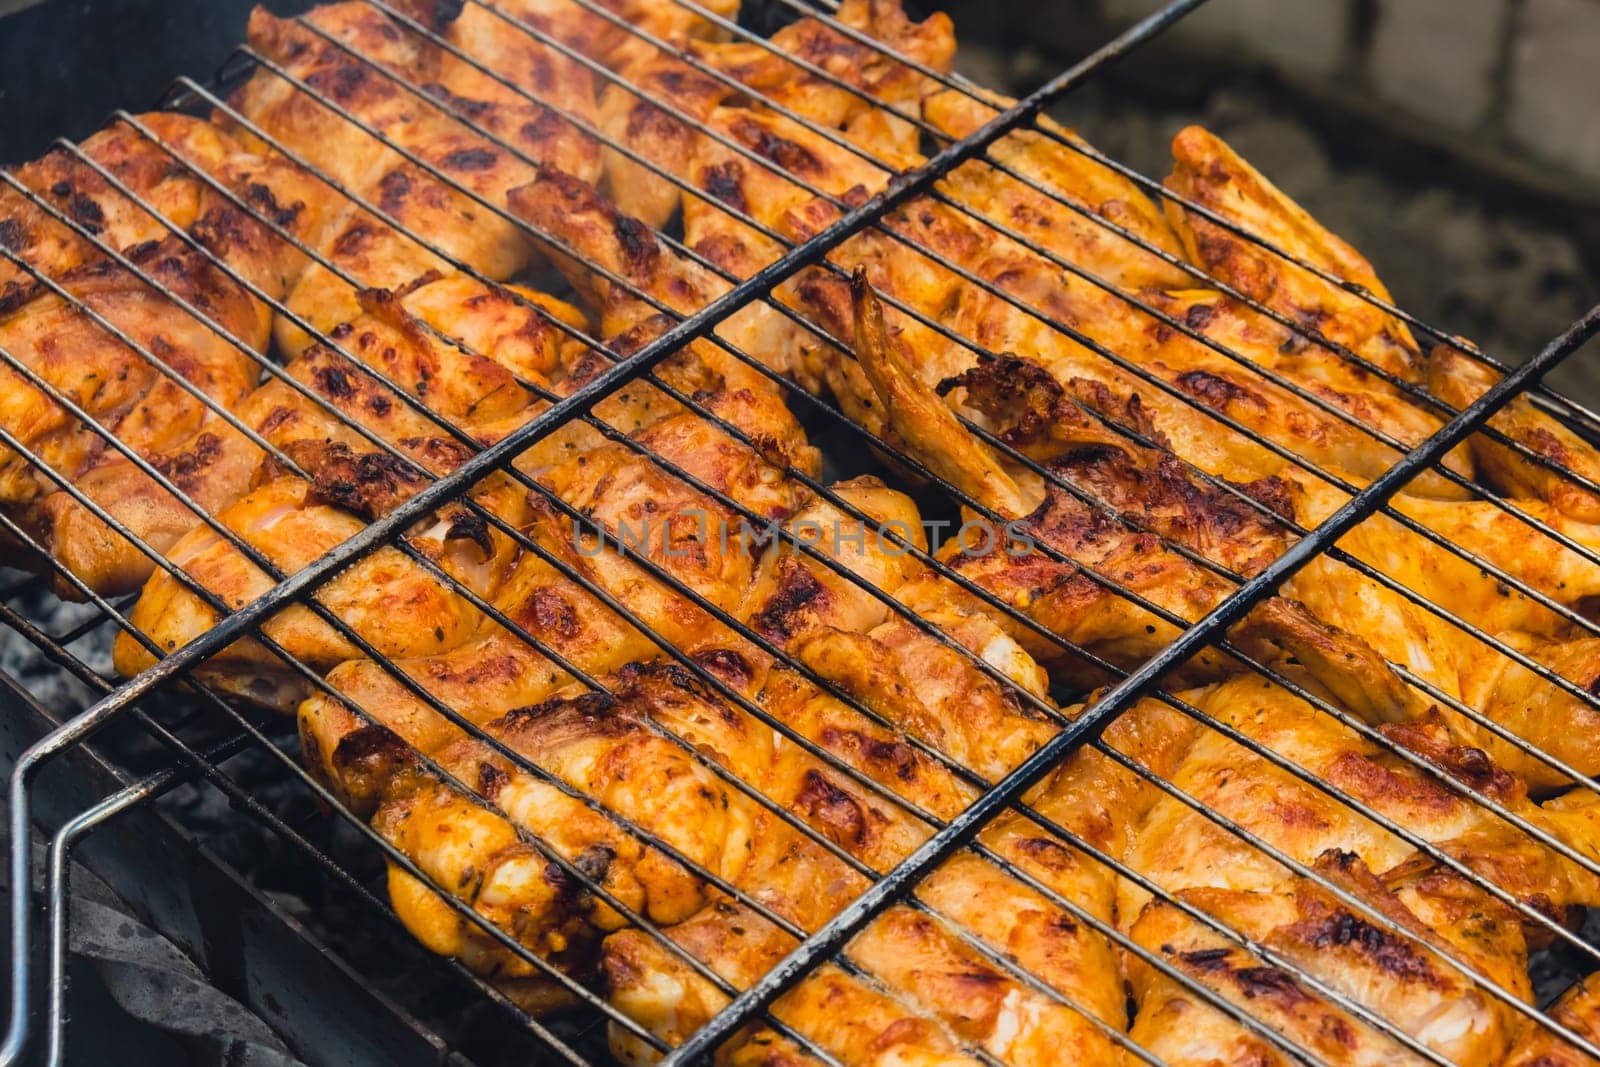 Delicious chicken frying on barbecue grill grate outdoor. Seasoning falling on fresh grilled chicken wings. Summer party food ideas. BBQ Juicy roasting chicken grill legs by anna_stasiia